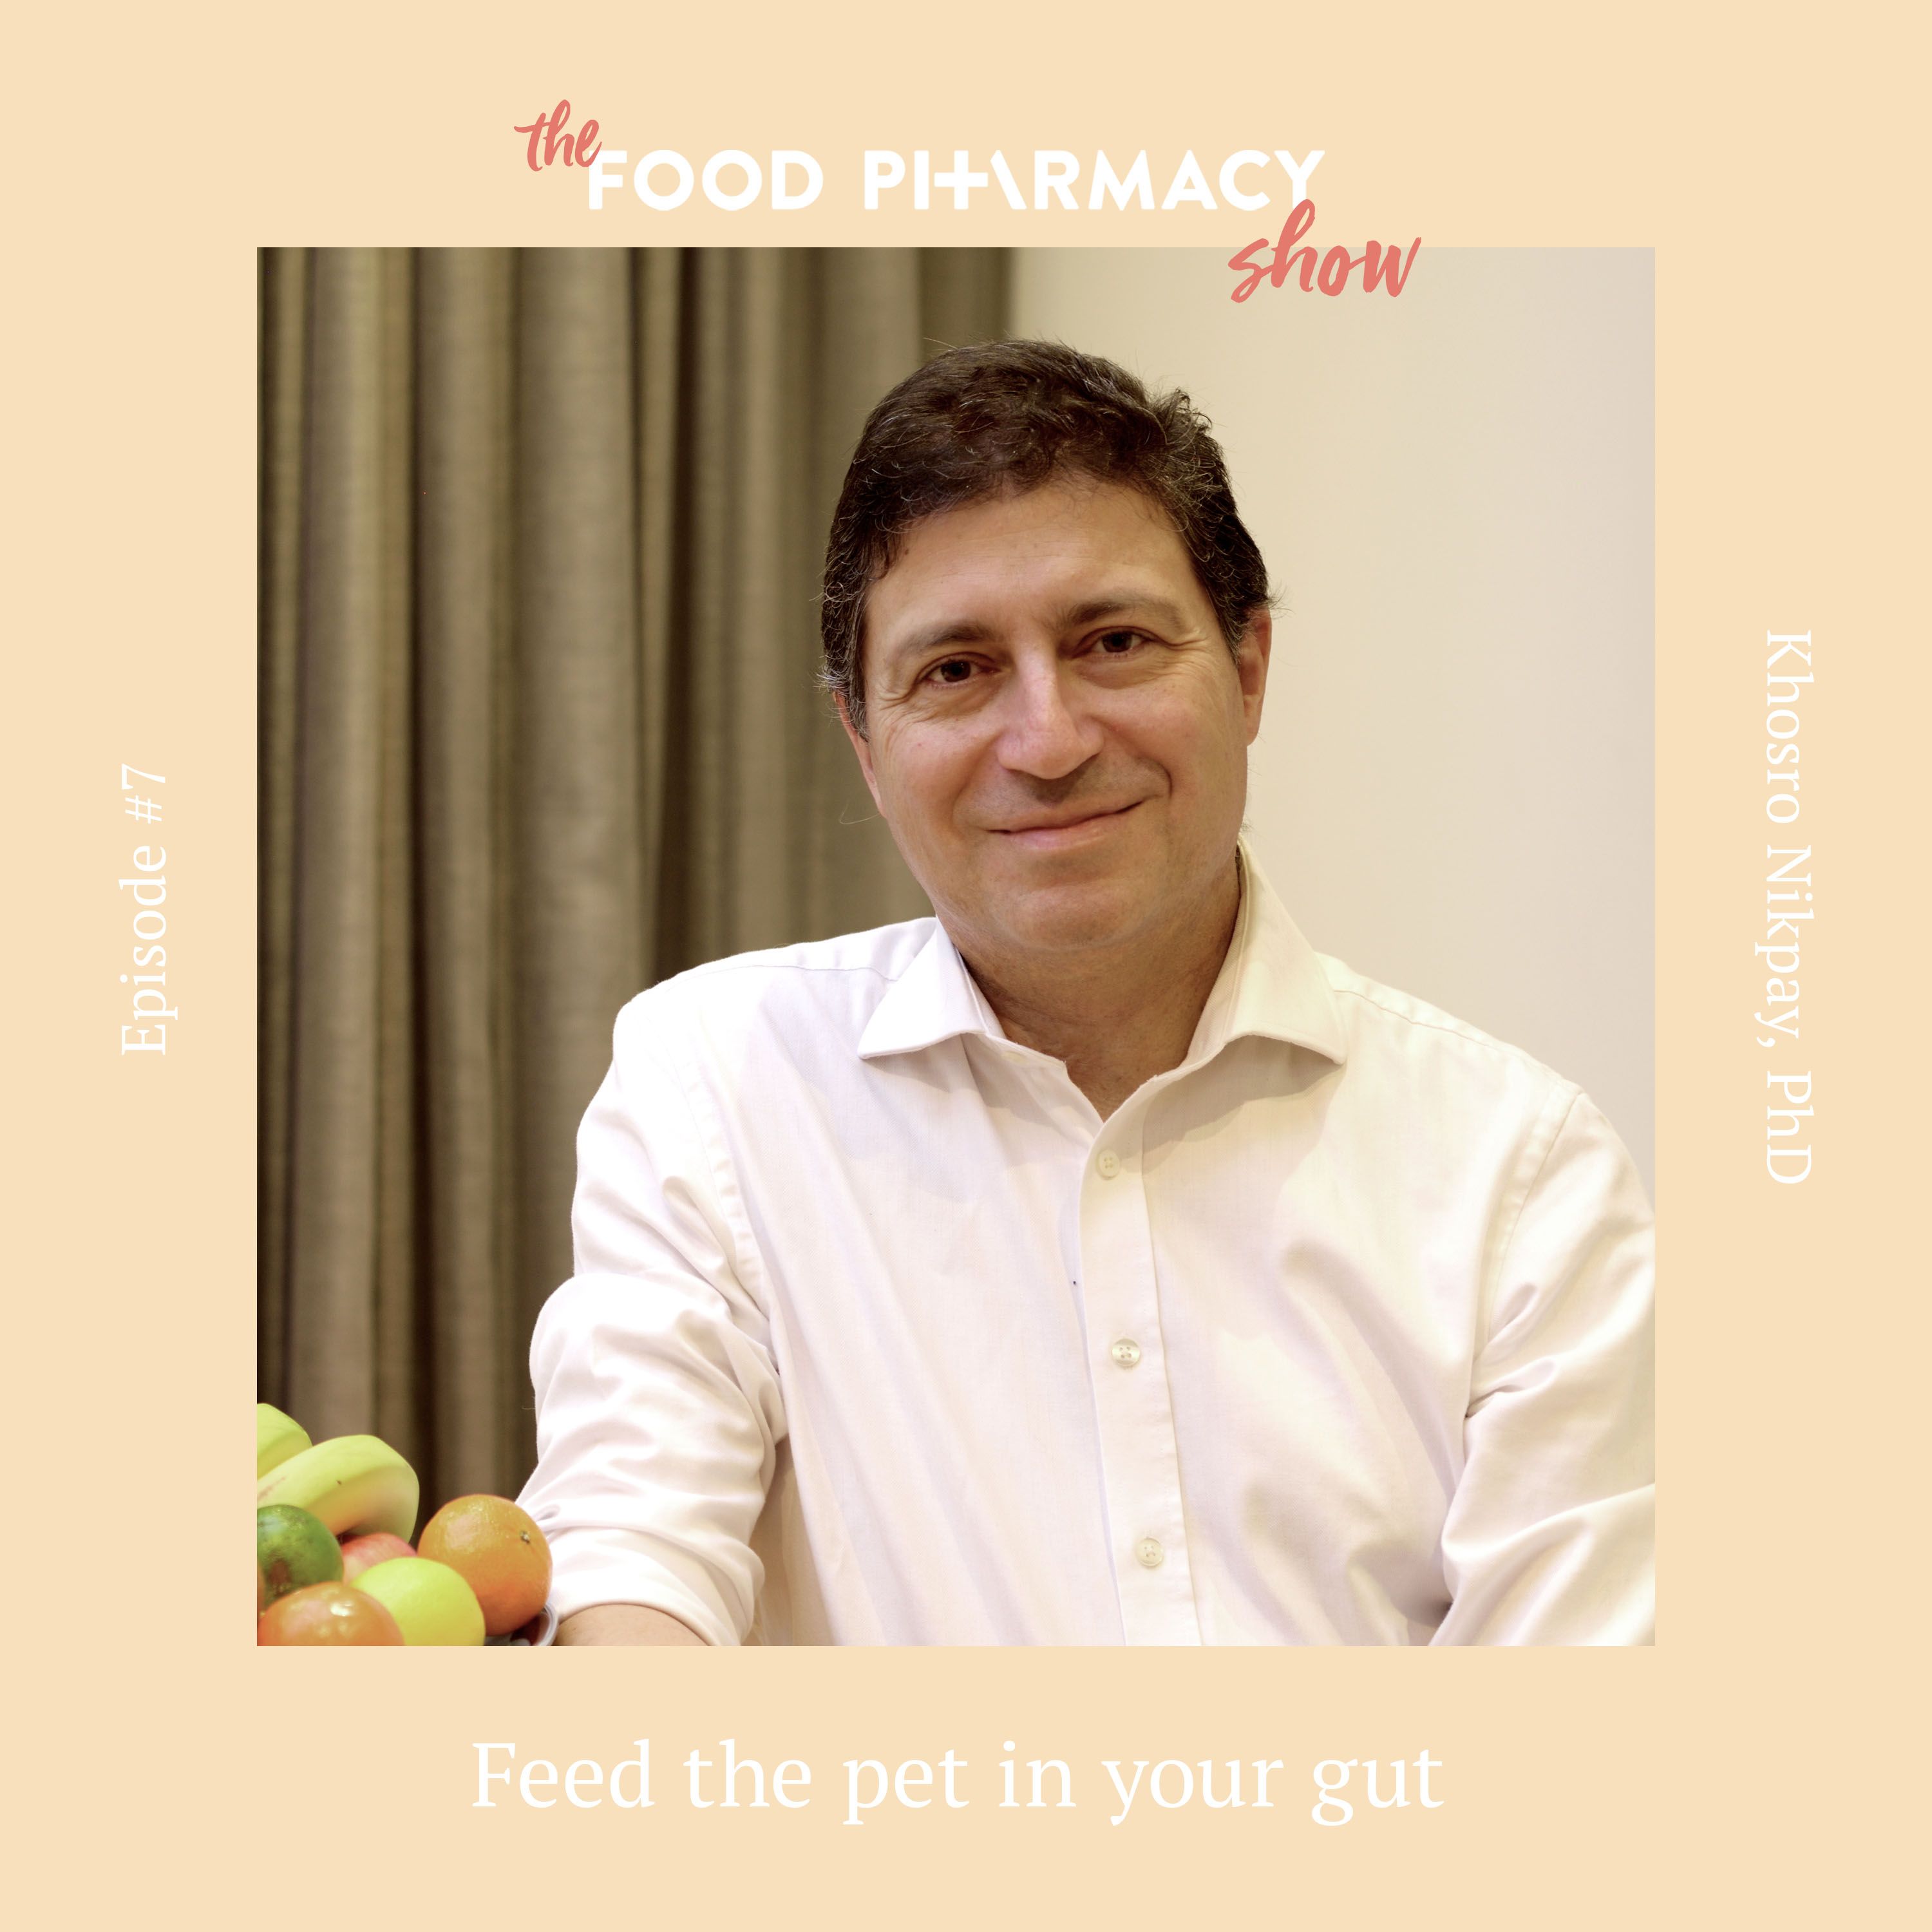 7. Khosro Nikpay PhD - feed the pet in your gut